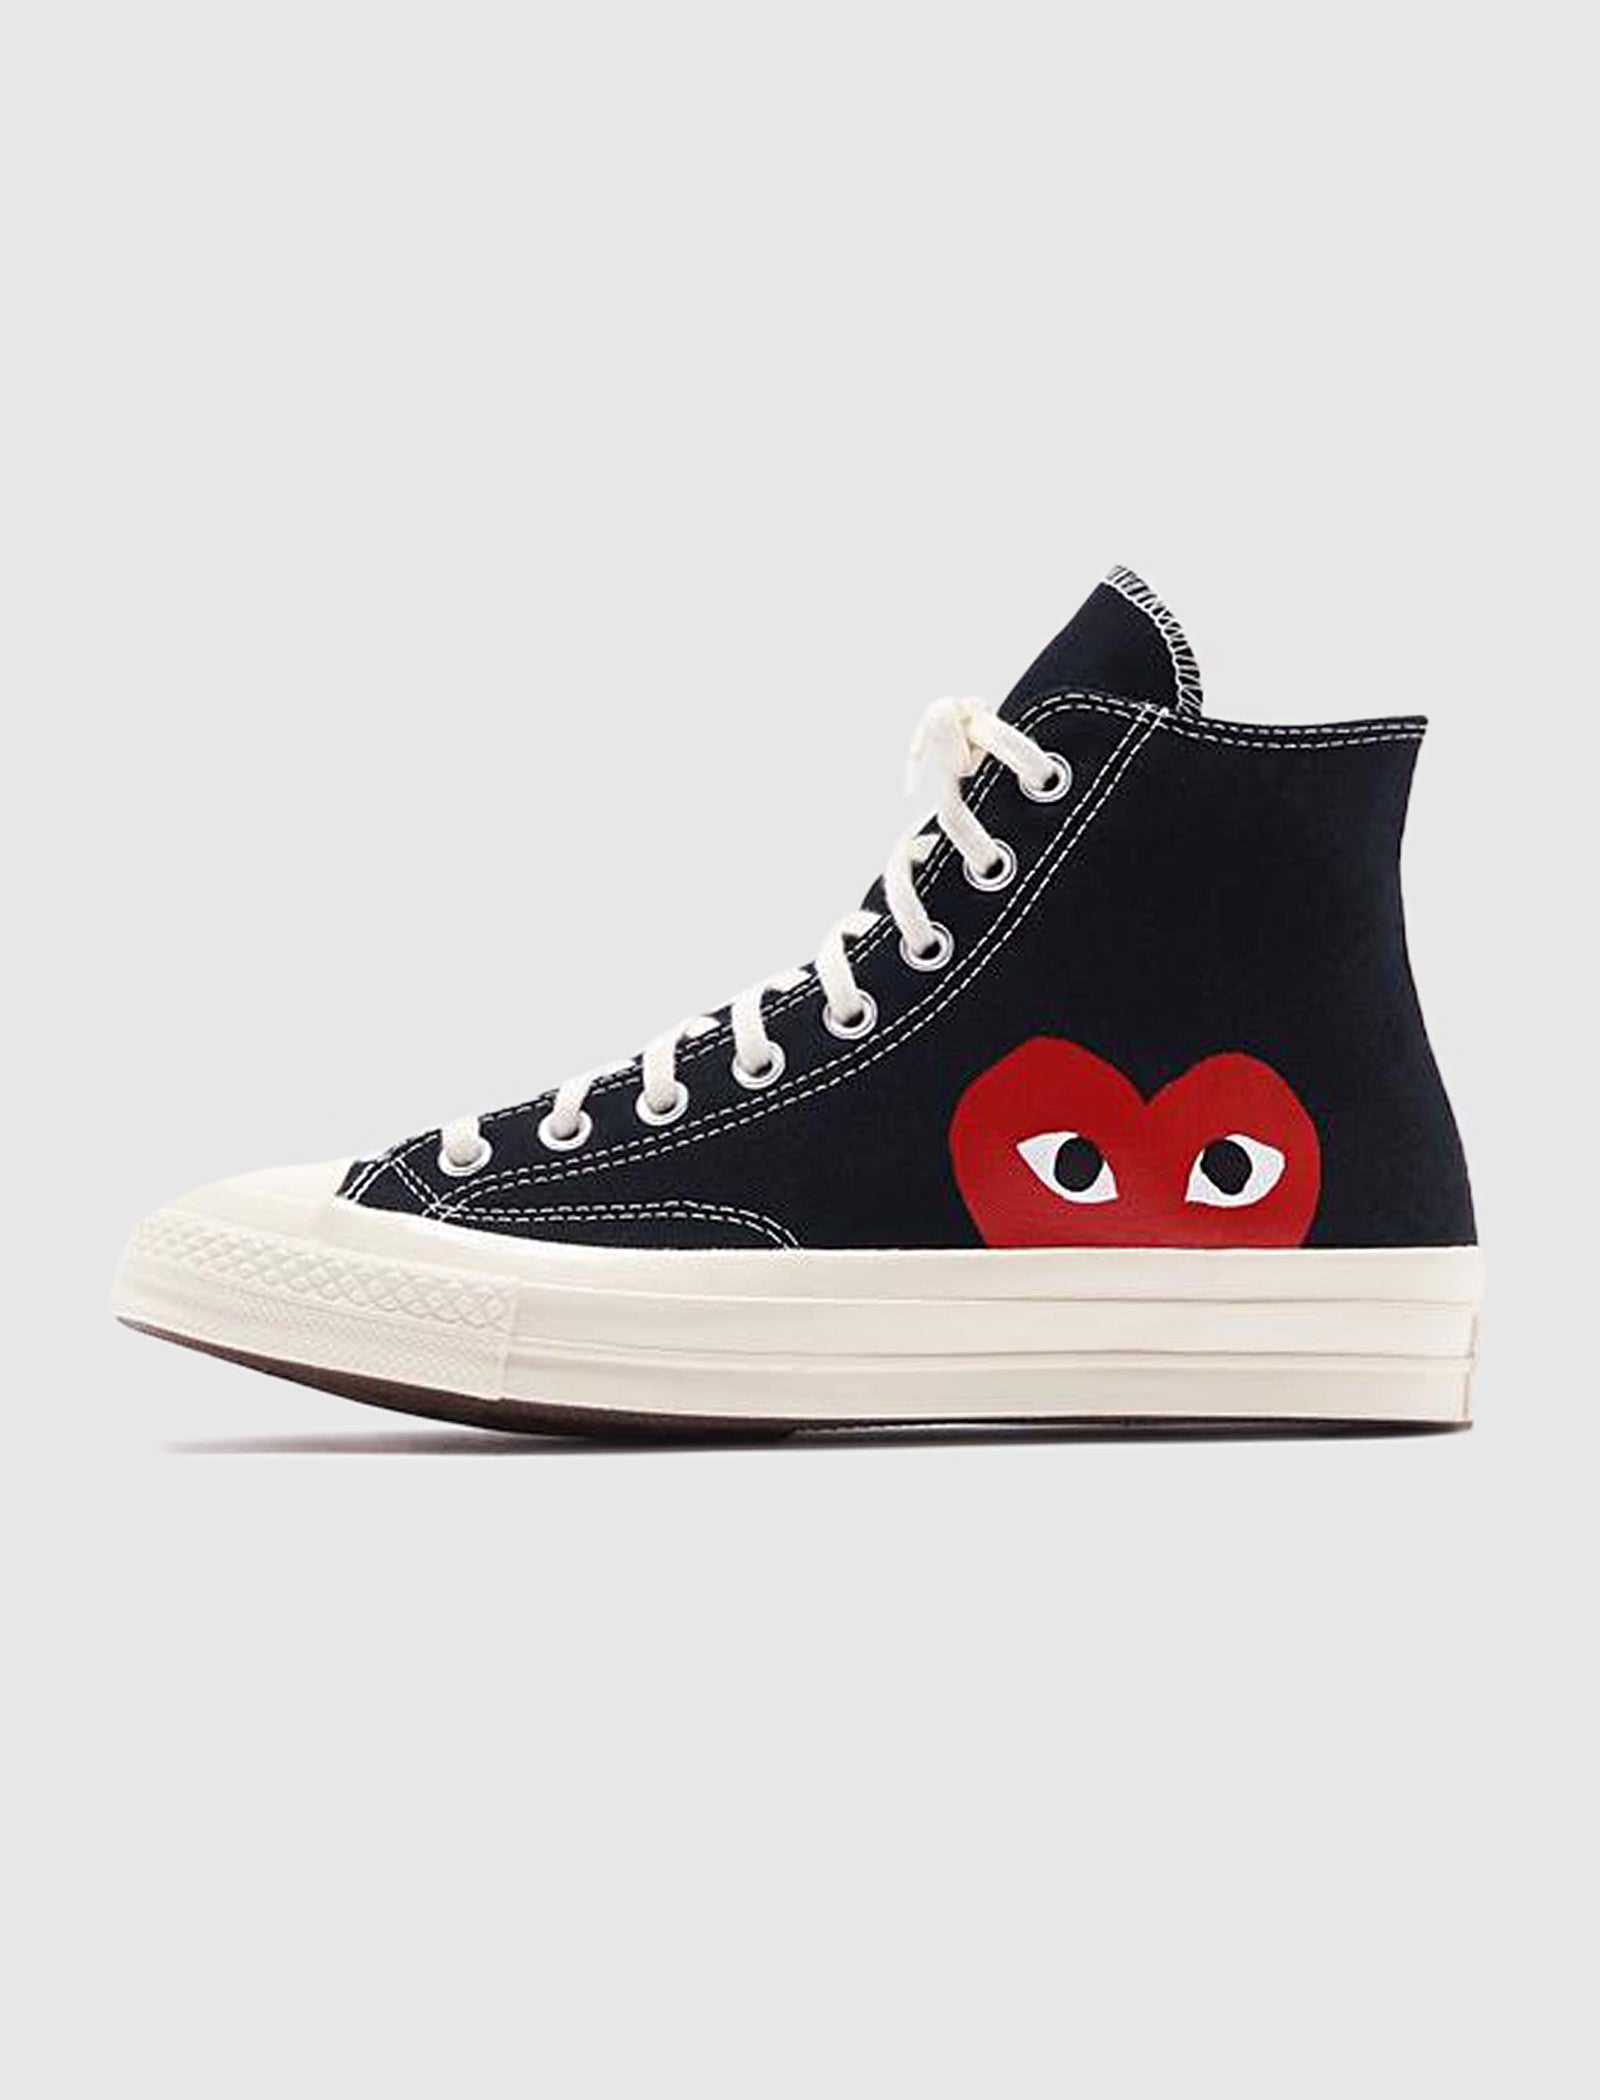 COMME DES PLAY CHUCK 70 – Store